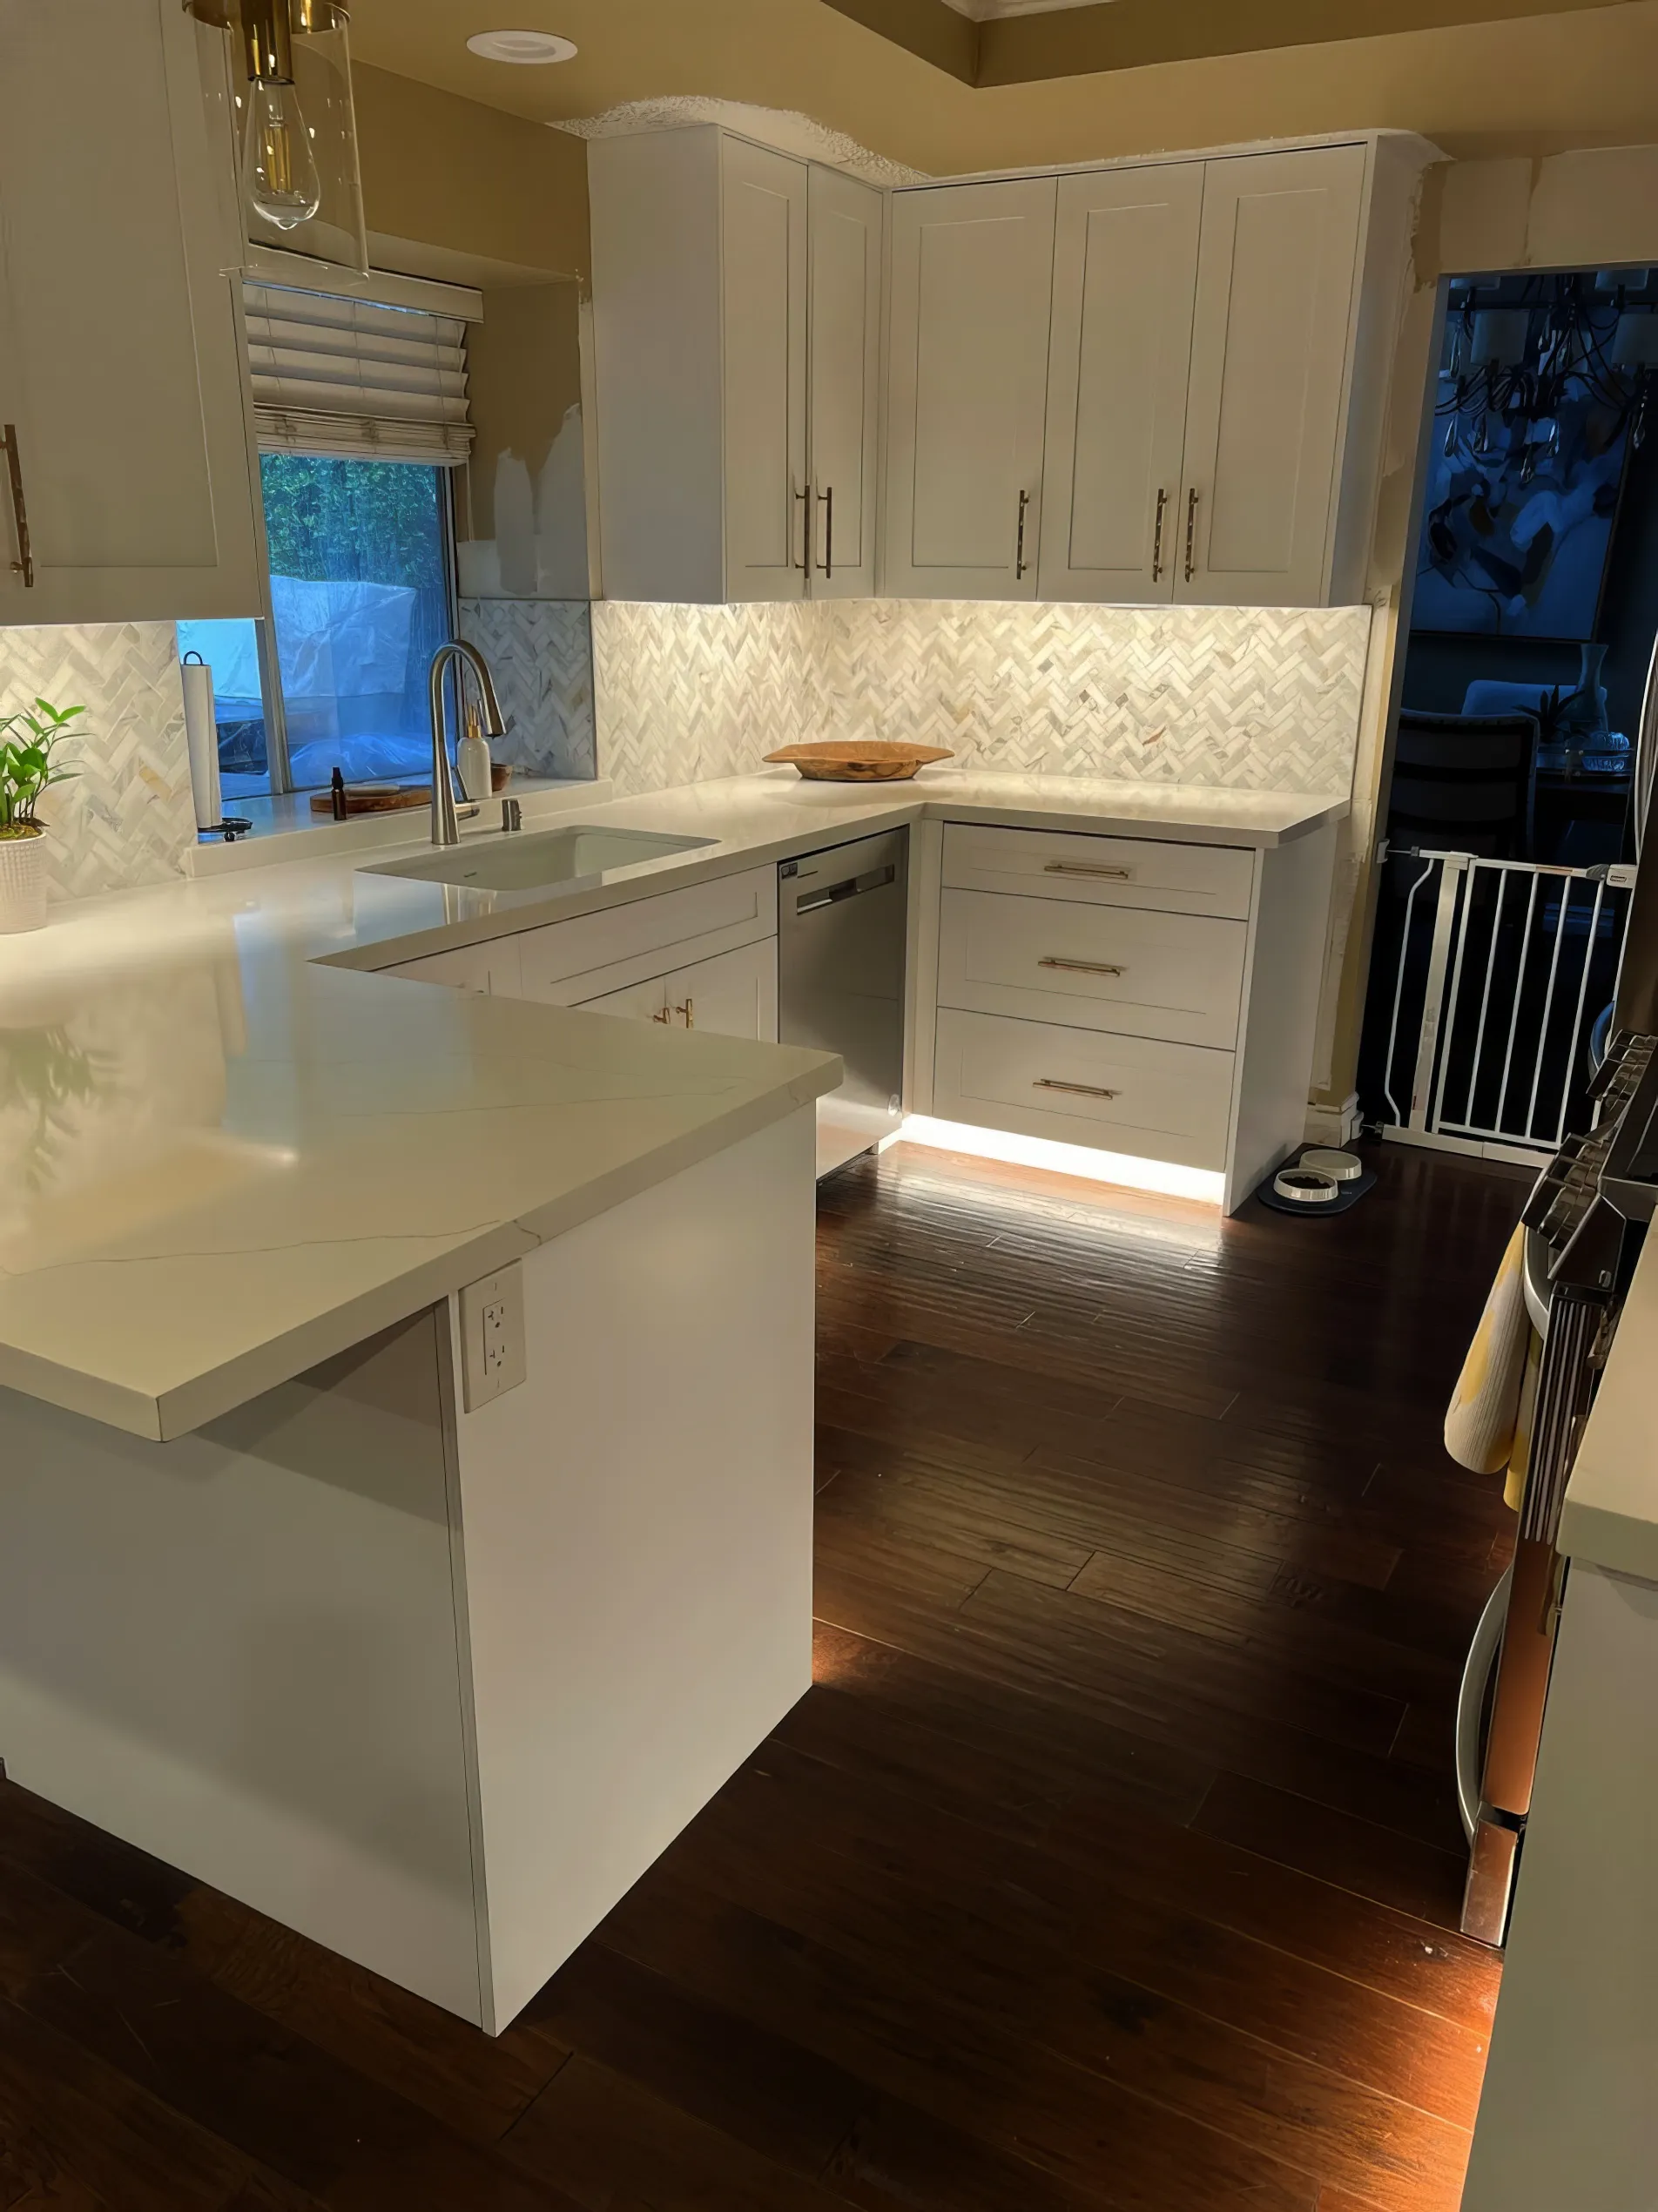 Countertops that are too old and worn out can ruin the aesthetic of any area in the house.